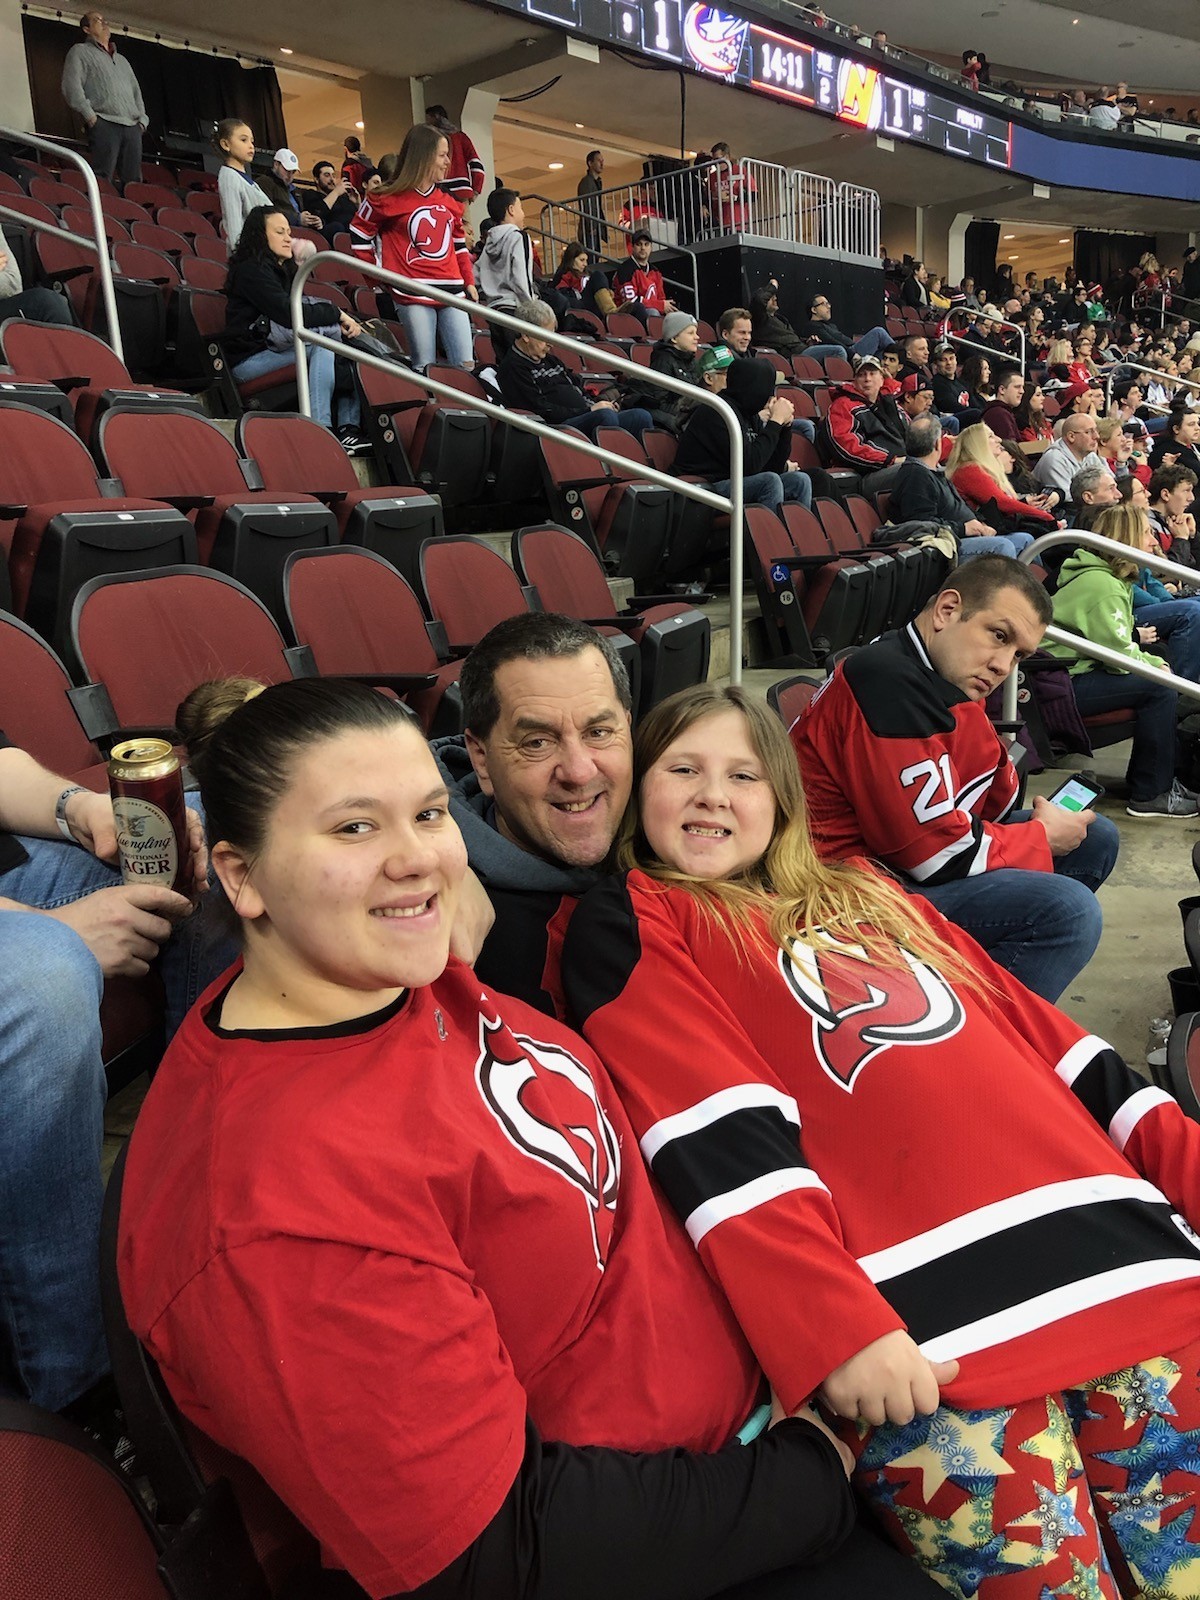 Yuengling partners with New Jersey Devils, Prudential Center